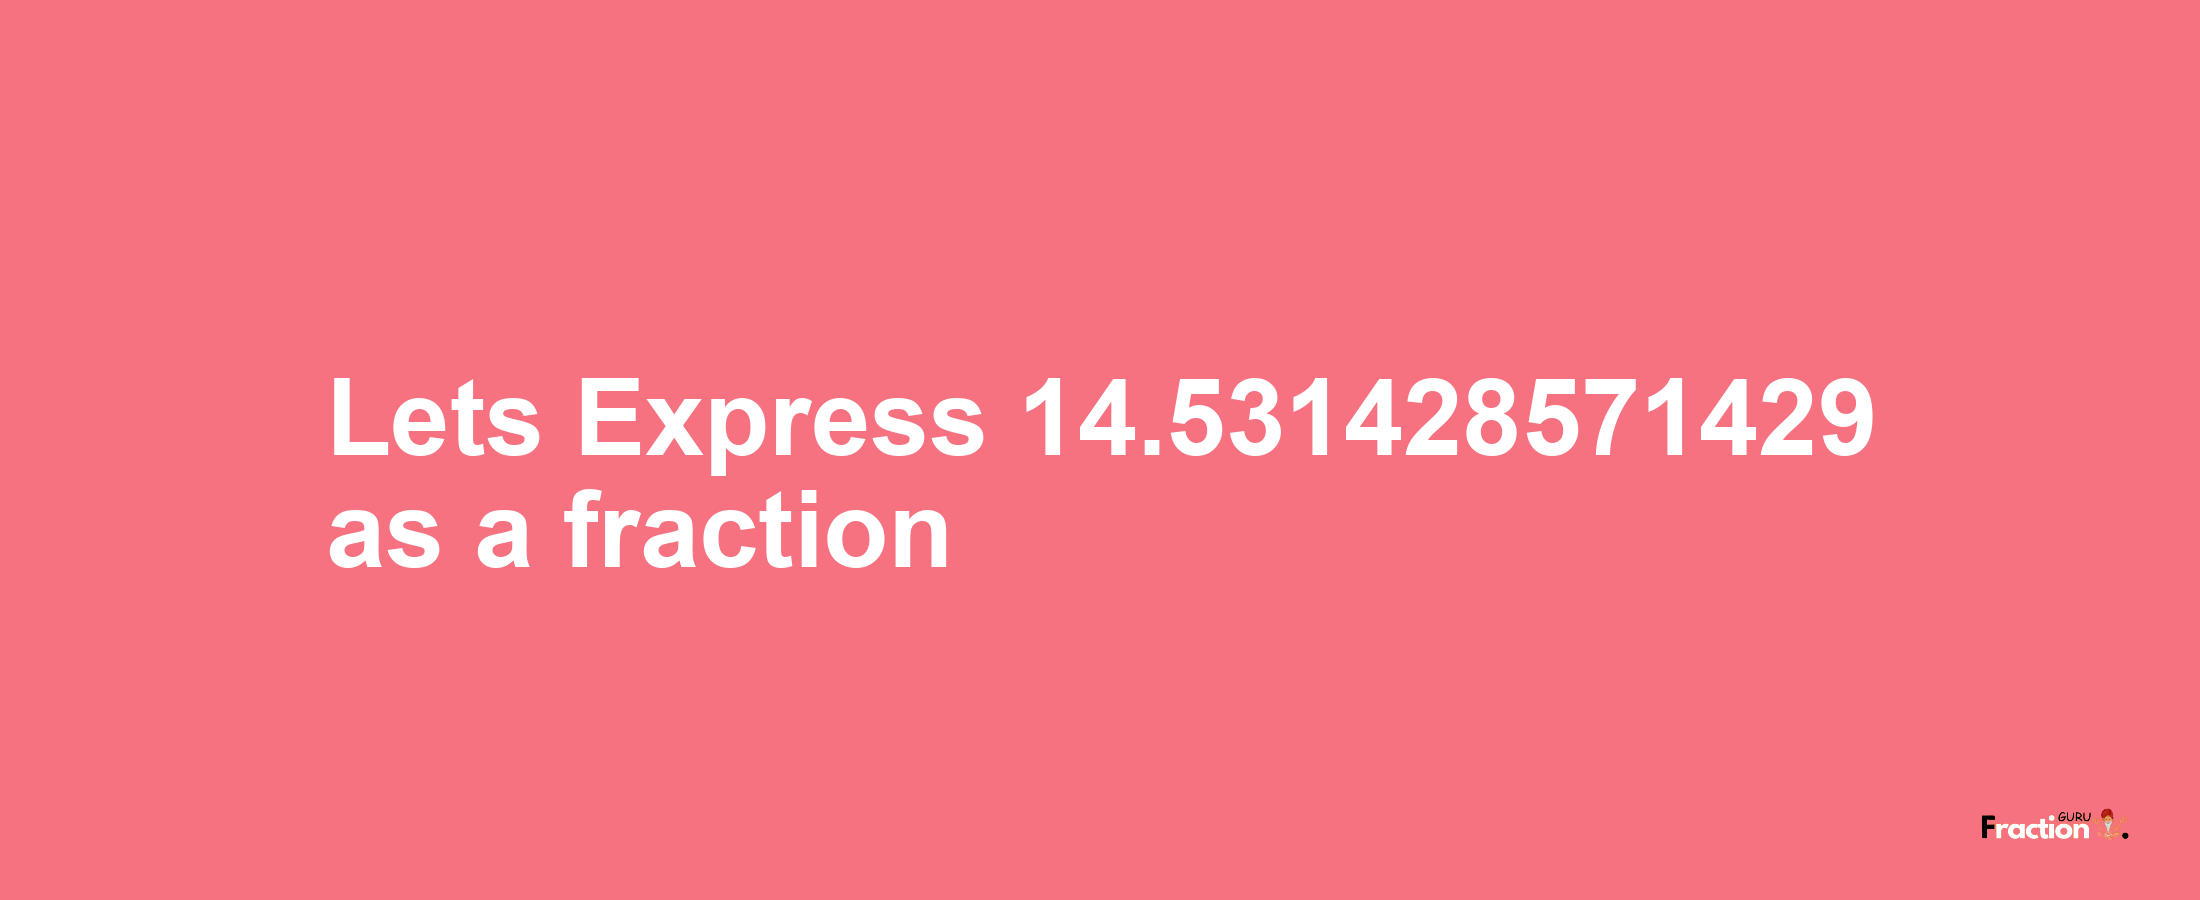 Lets Express 14.531428571429 as afraction